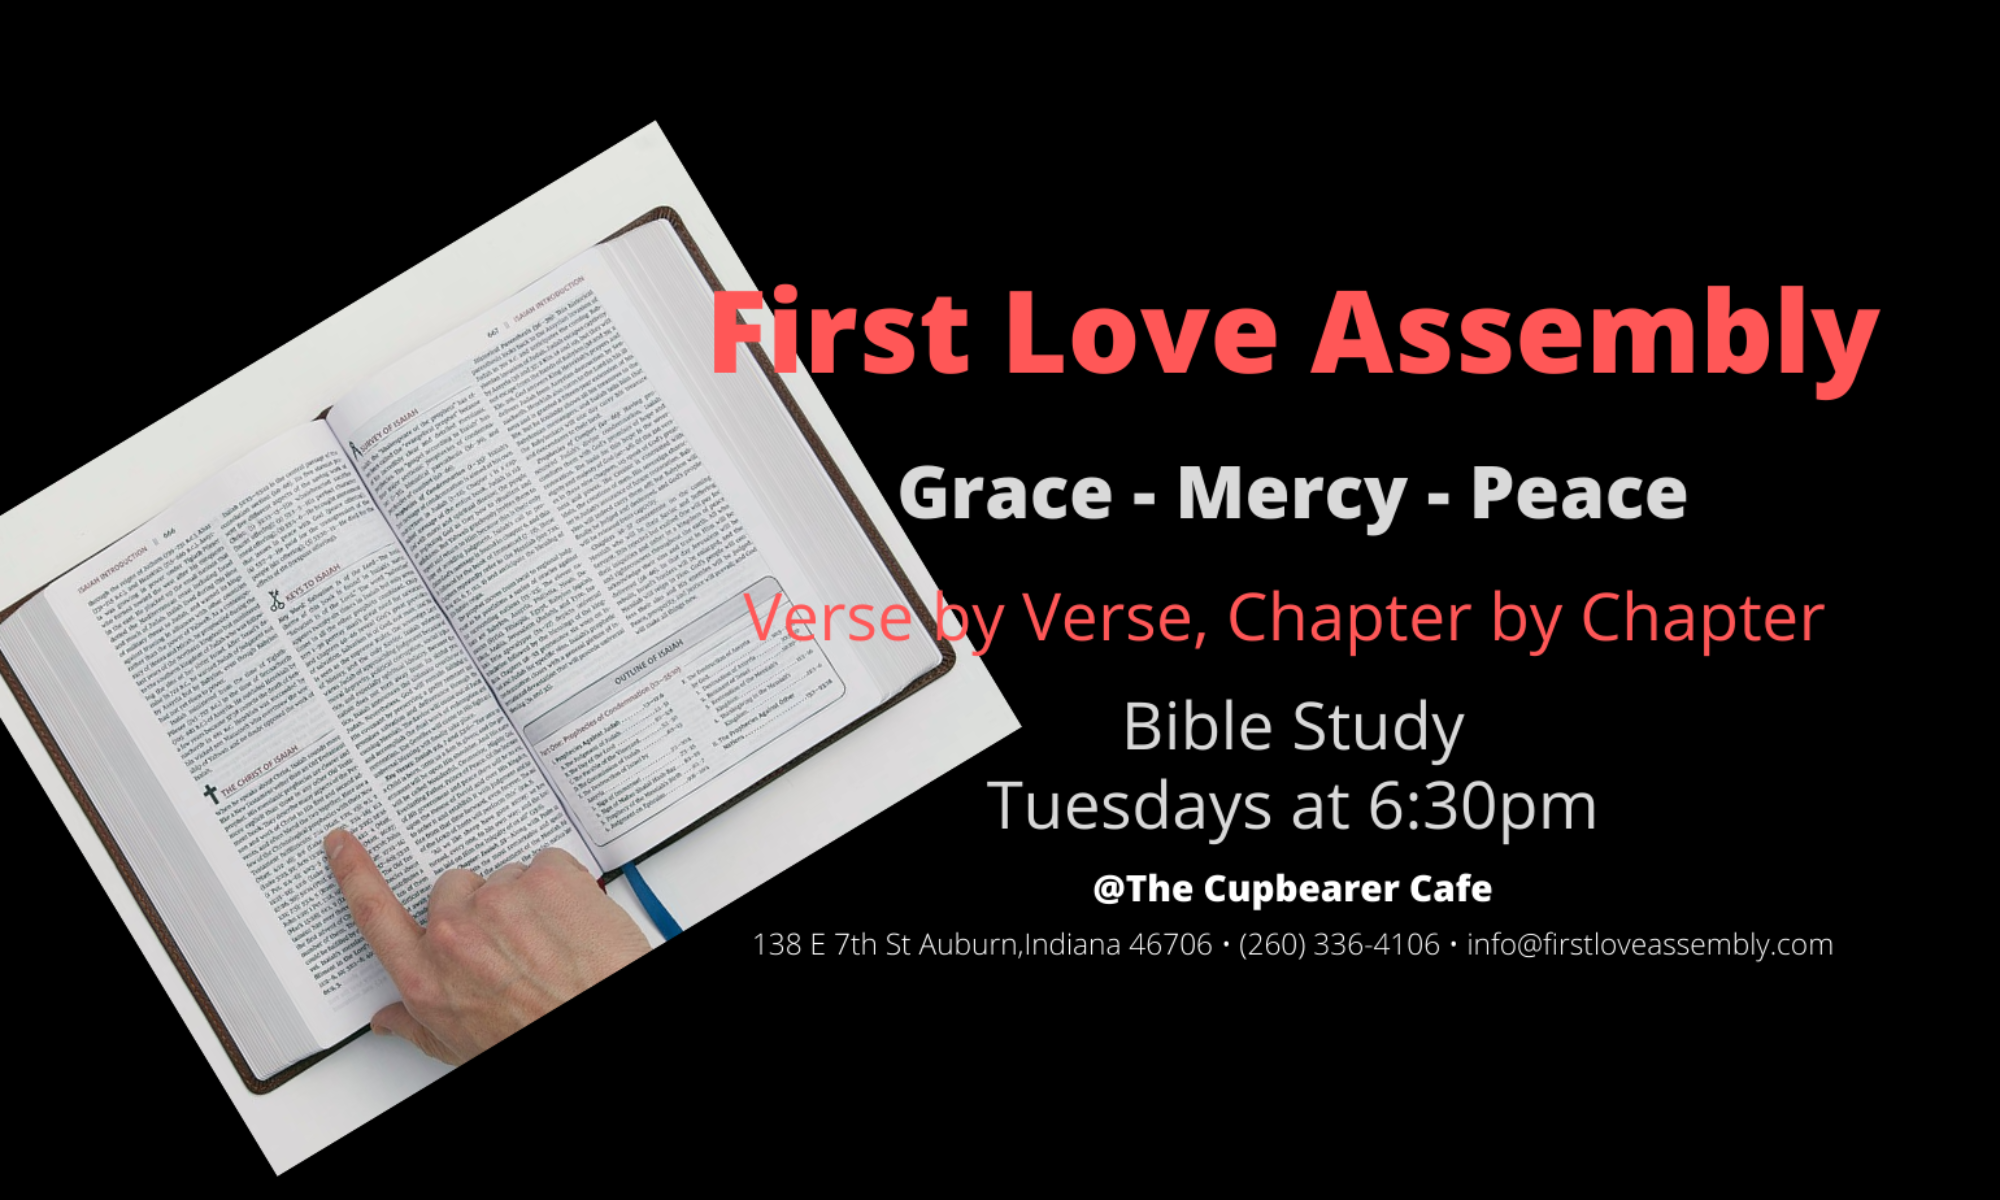 First Love Assembly